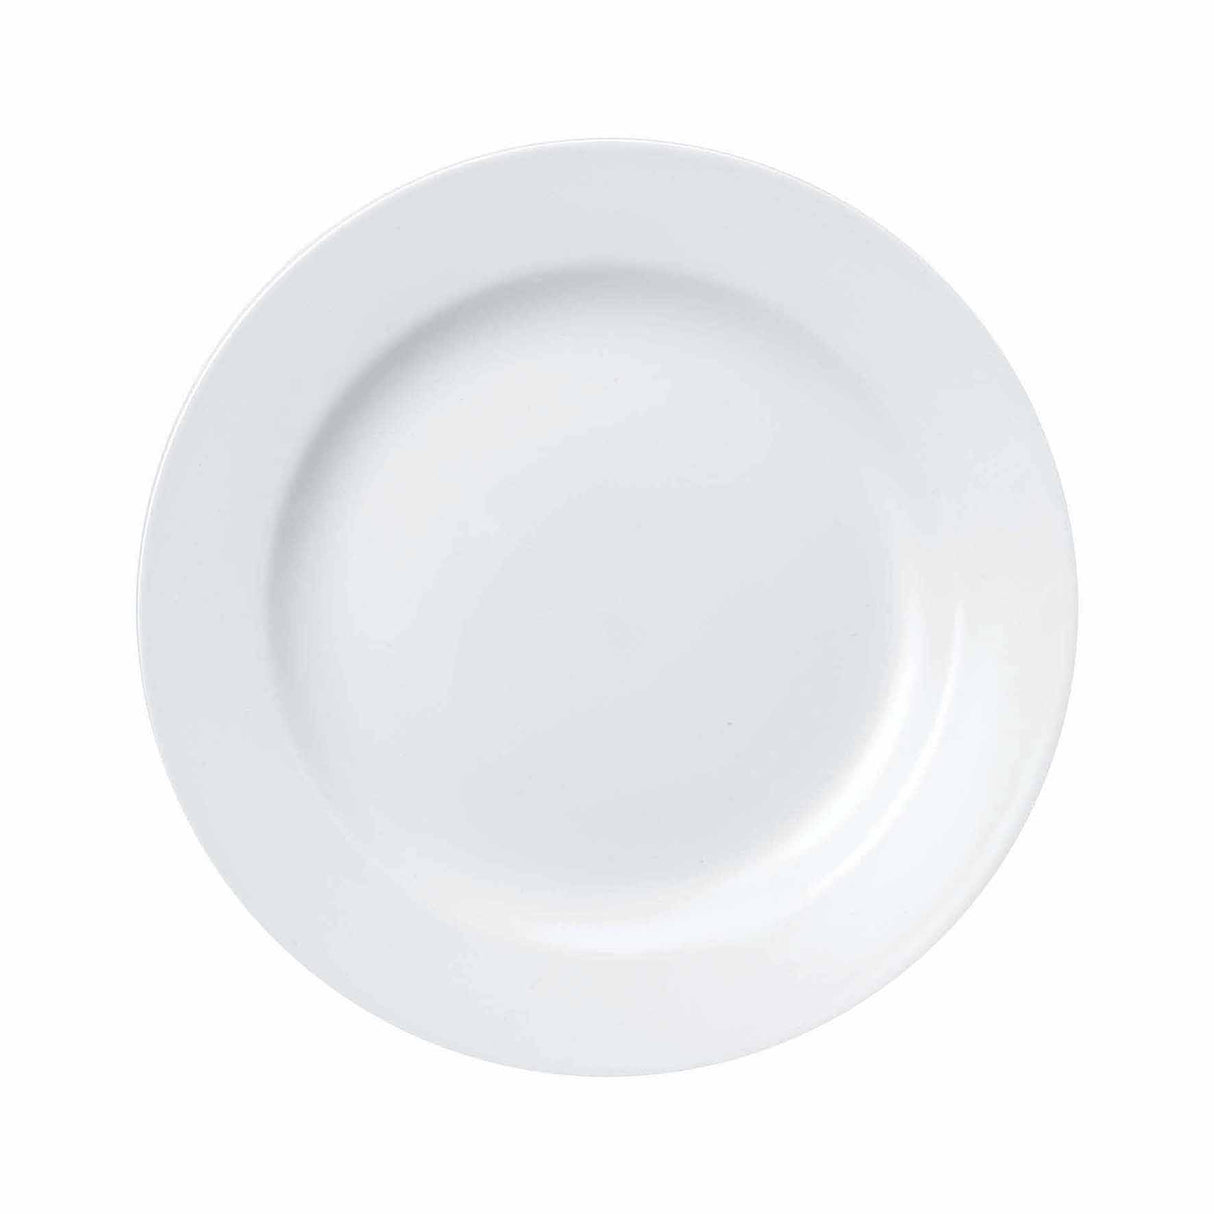 Round Plate - 203mm, Wide Rim, Classic from Churchill. made out of Porcelain and sold in boxes of 24. Hospitality quality at wholesale price with The Flying Fork! 